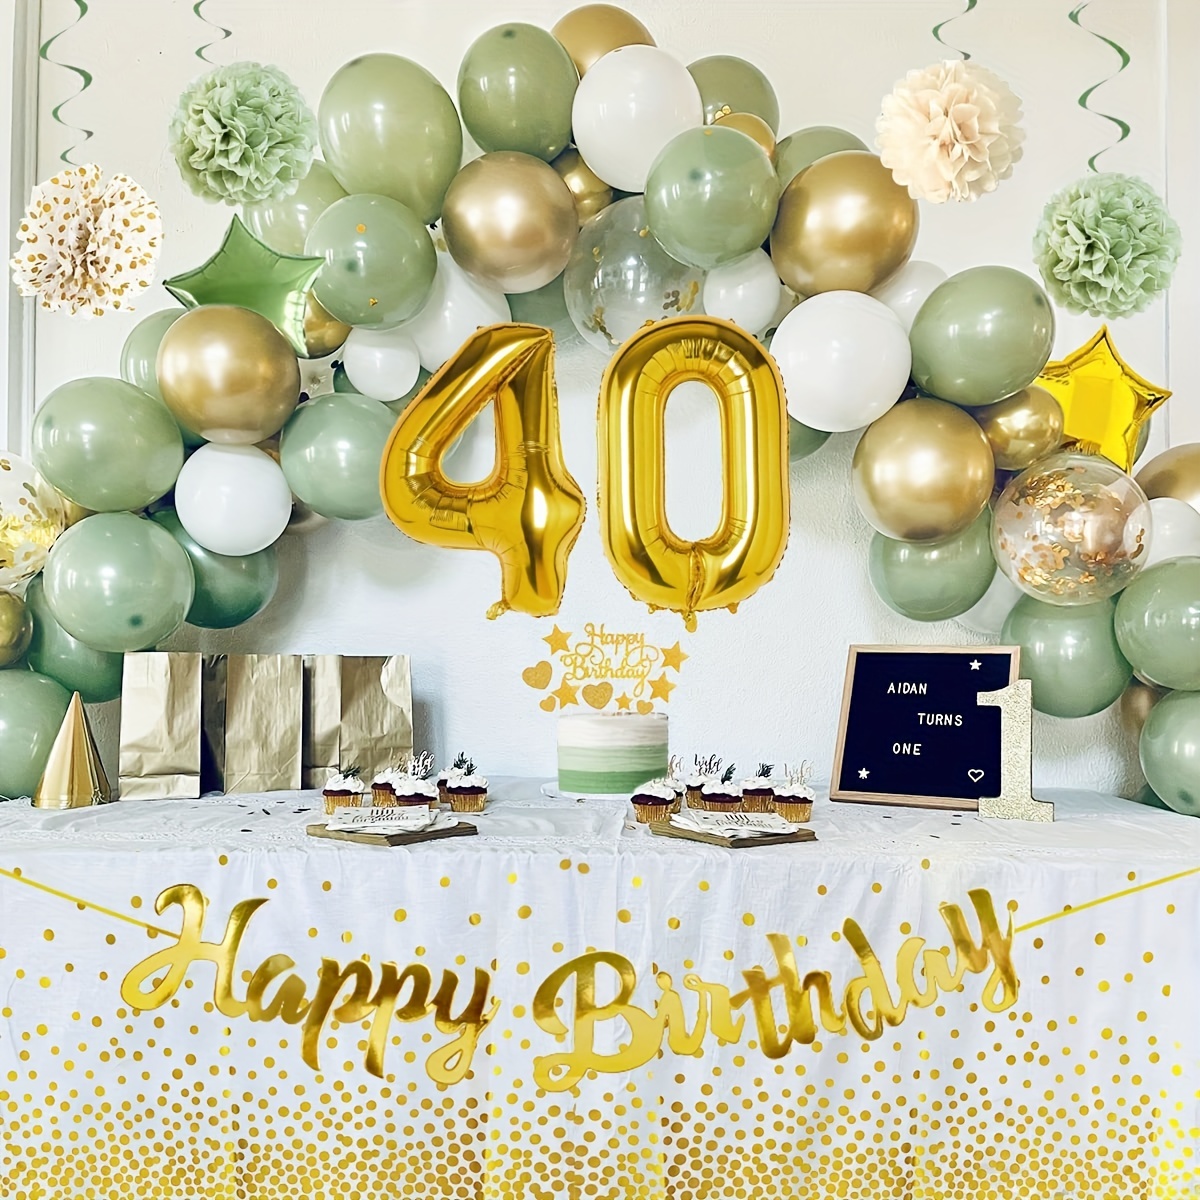 40th Birthday Party Decorations for Men Including Happy Birthday